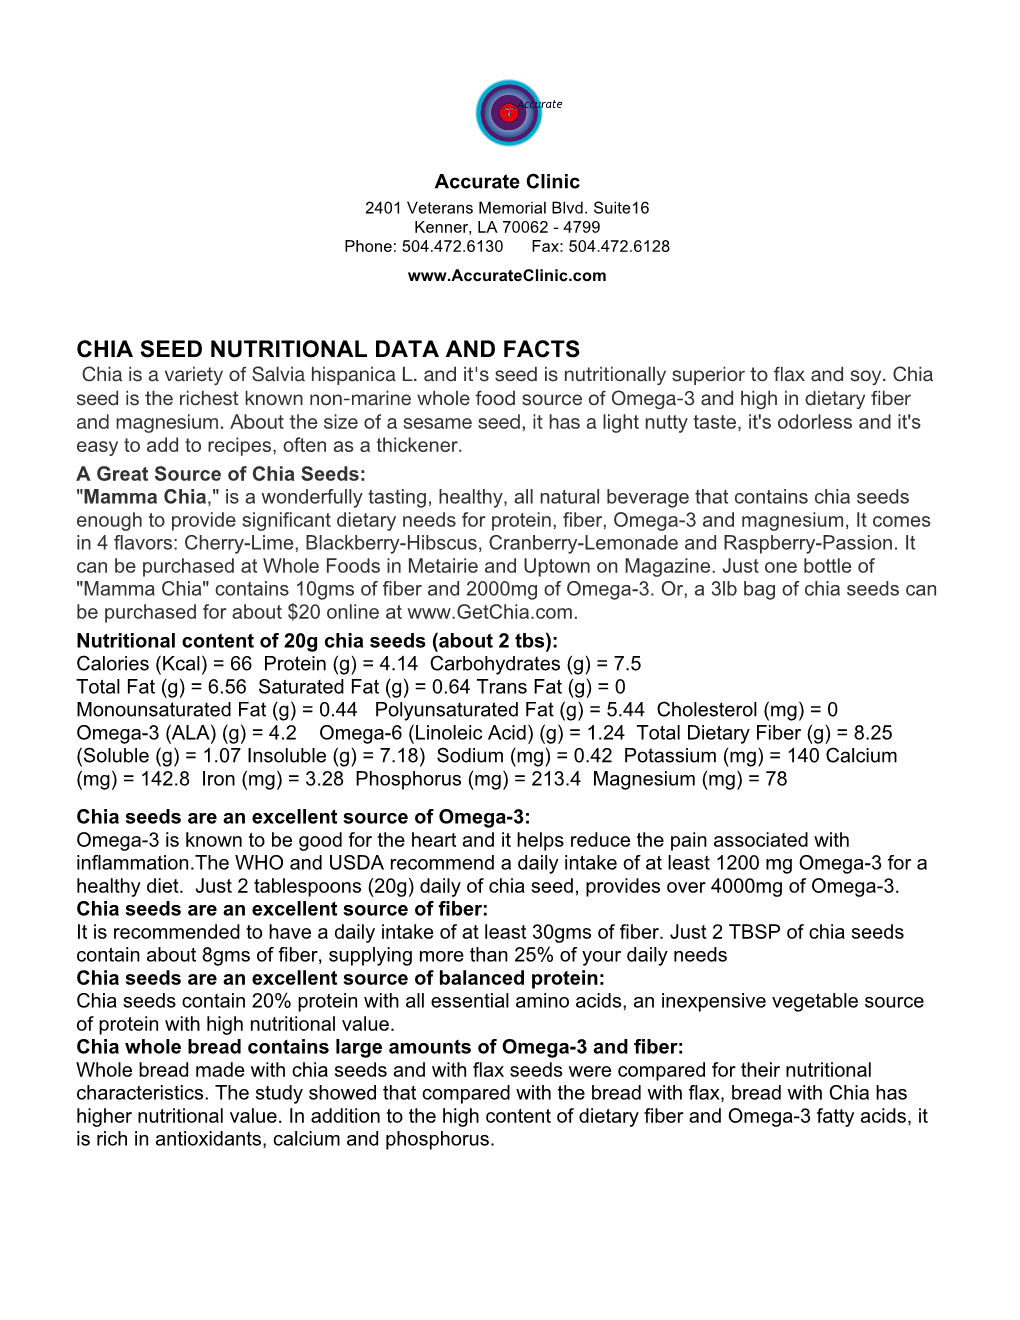 CHIA SEED NUTRITIONAL DATA and FACTS Chia Is a Variety of Salvia Hispanica L